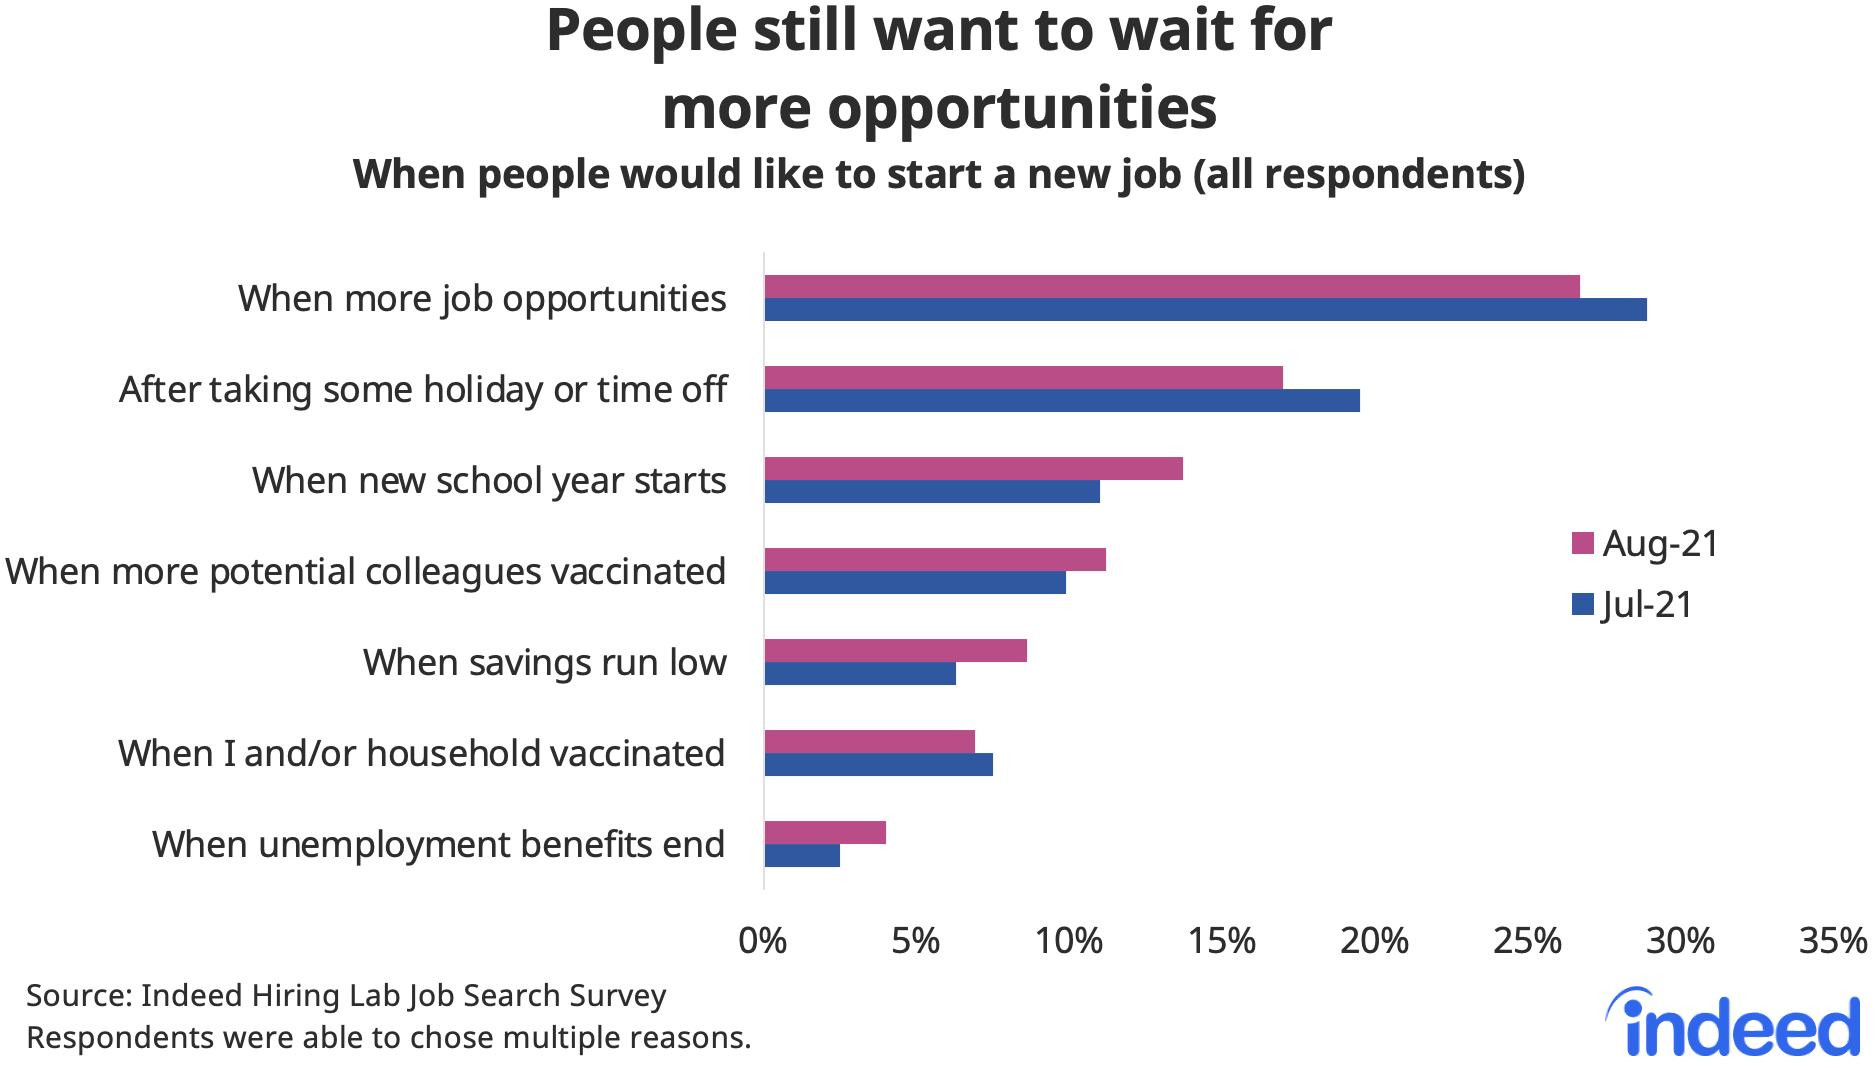 Bar chart titled “People still want to wait for more opportunities.”